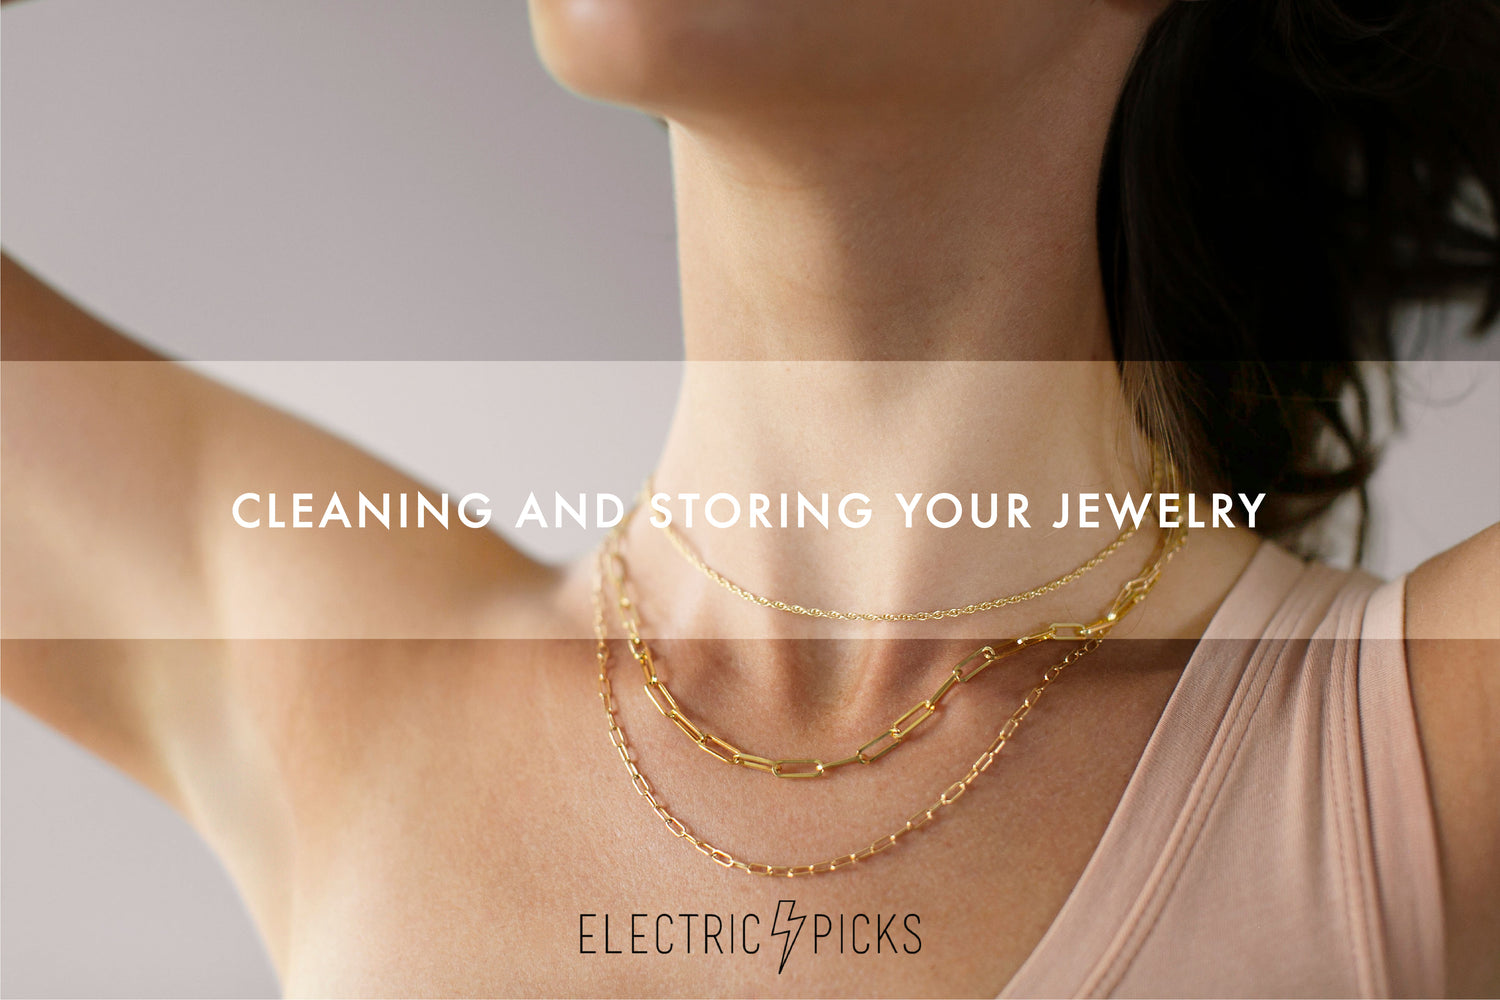 The Golden Rules for Flawless Jewels: Our Guide to Jewelry Cleaning